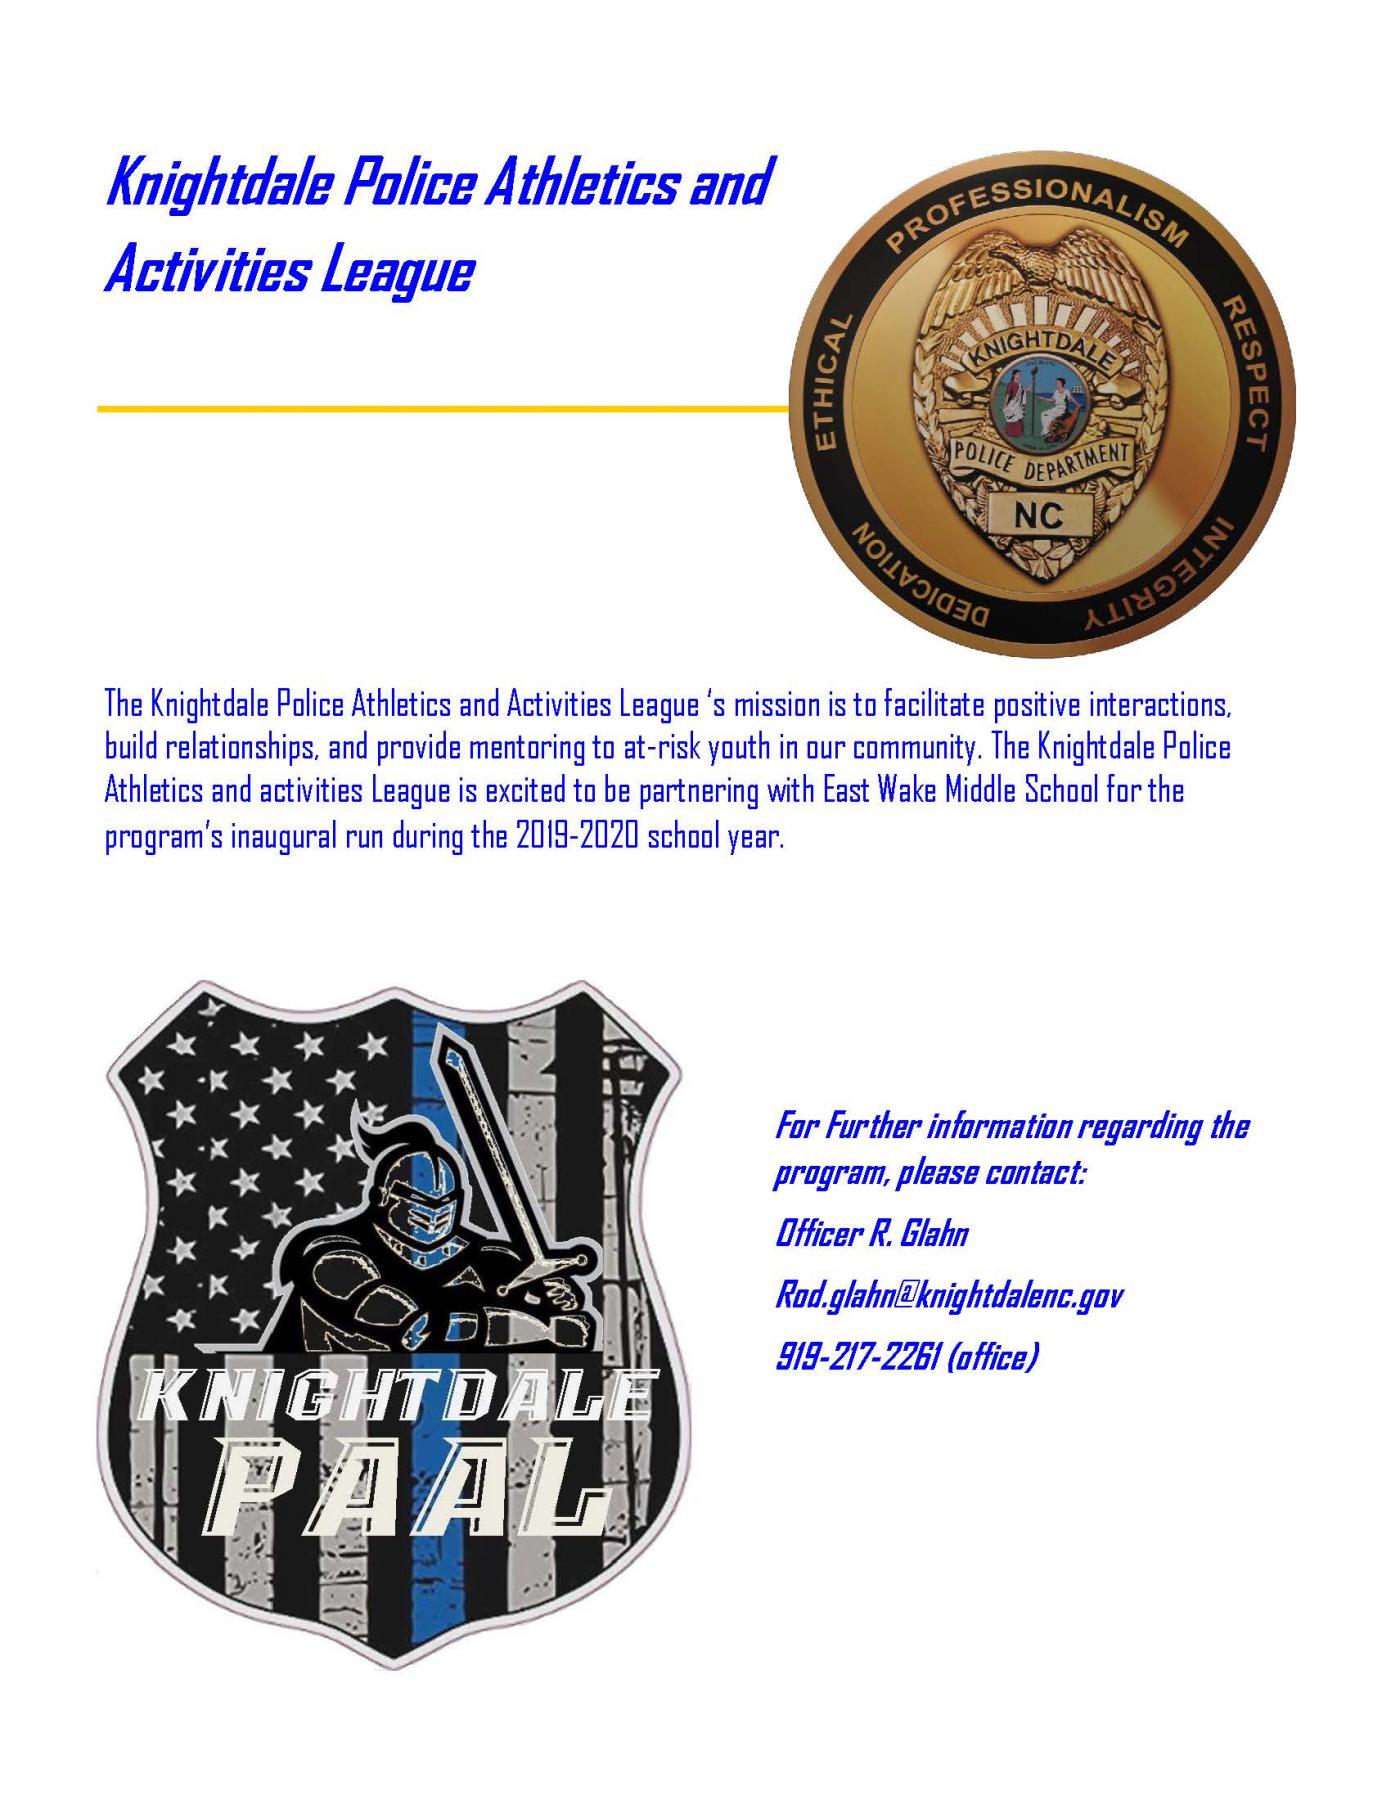 Knightdale Police Athletics and Activities League Flyer